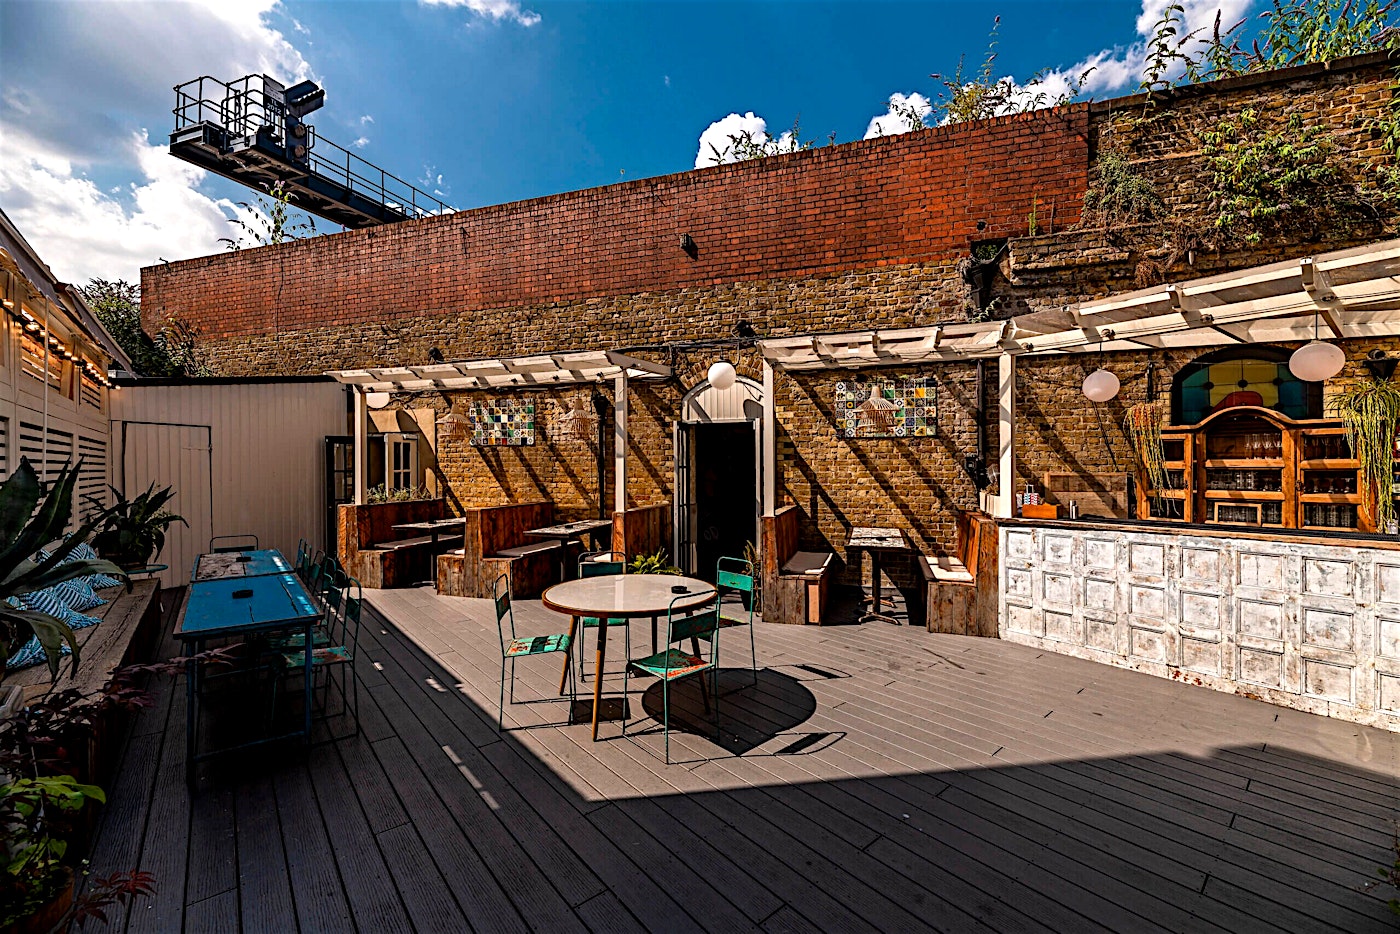 the outdoor terrace of London Bridge bar and music venue Omeara